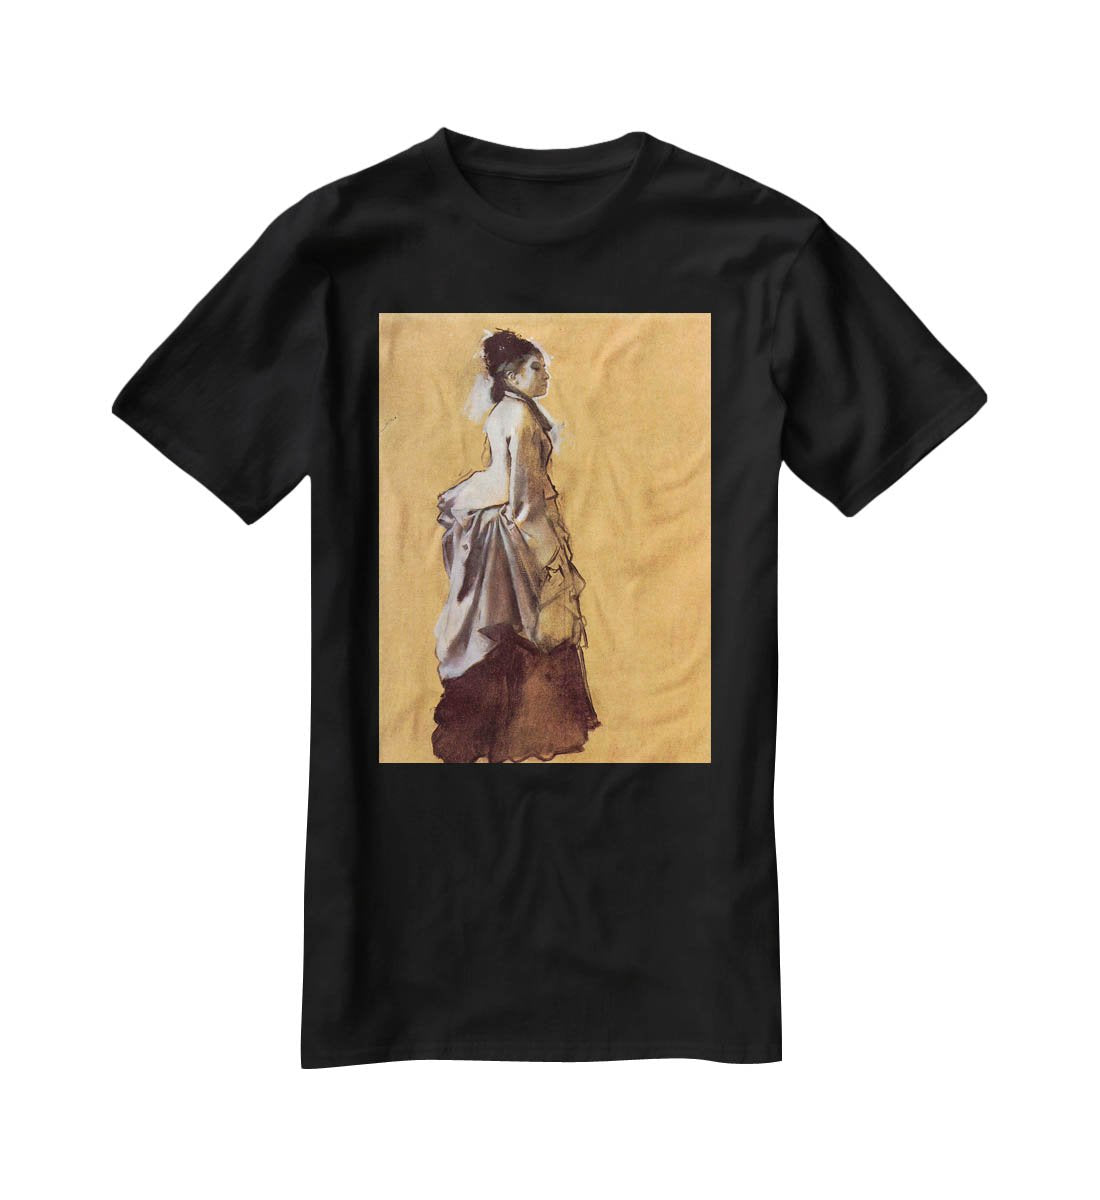 Young lady in the road costume by Degas T-Shirt - Canvas Art Rocks - 1